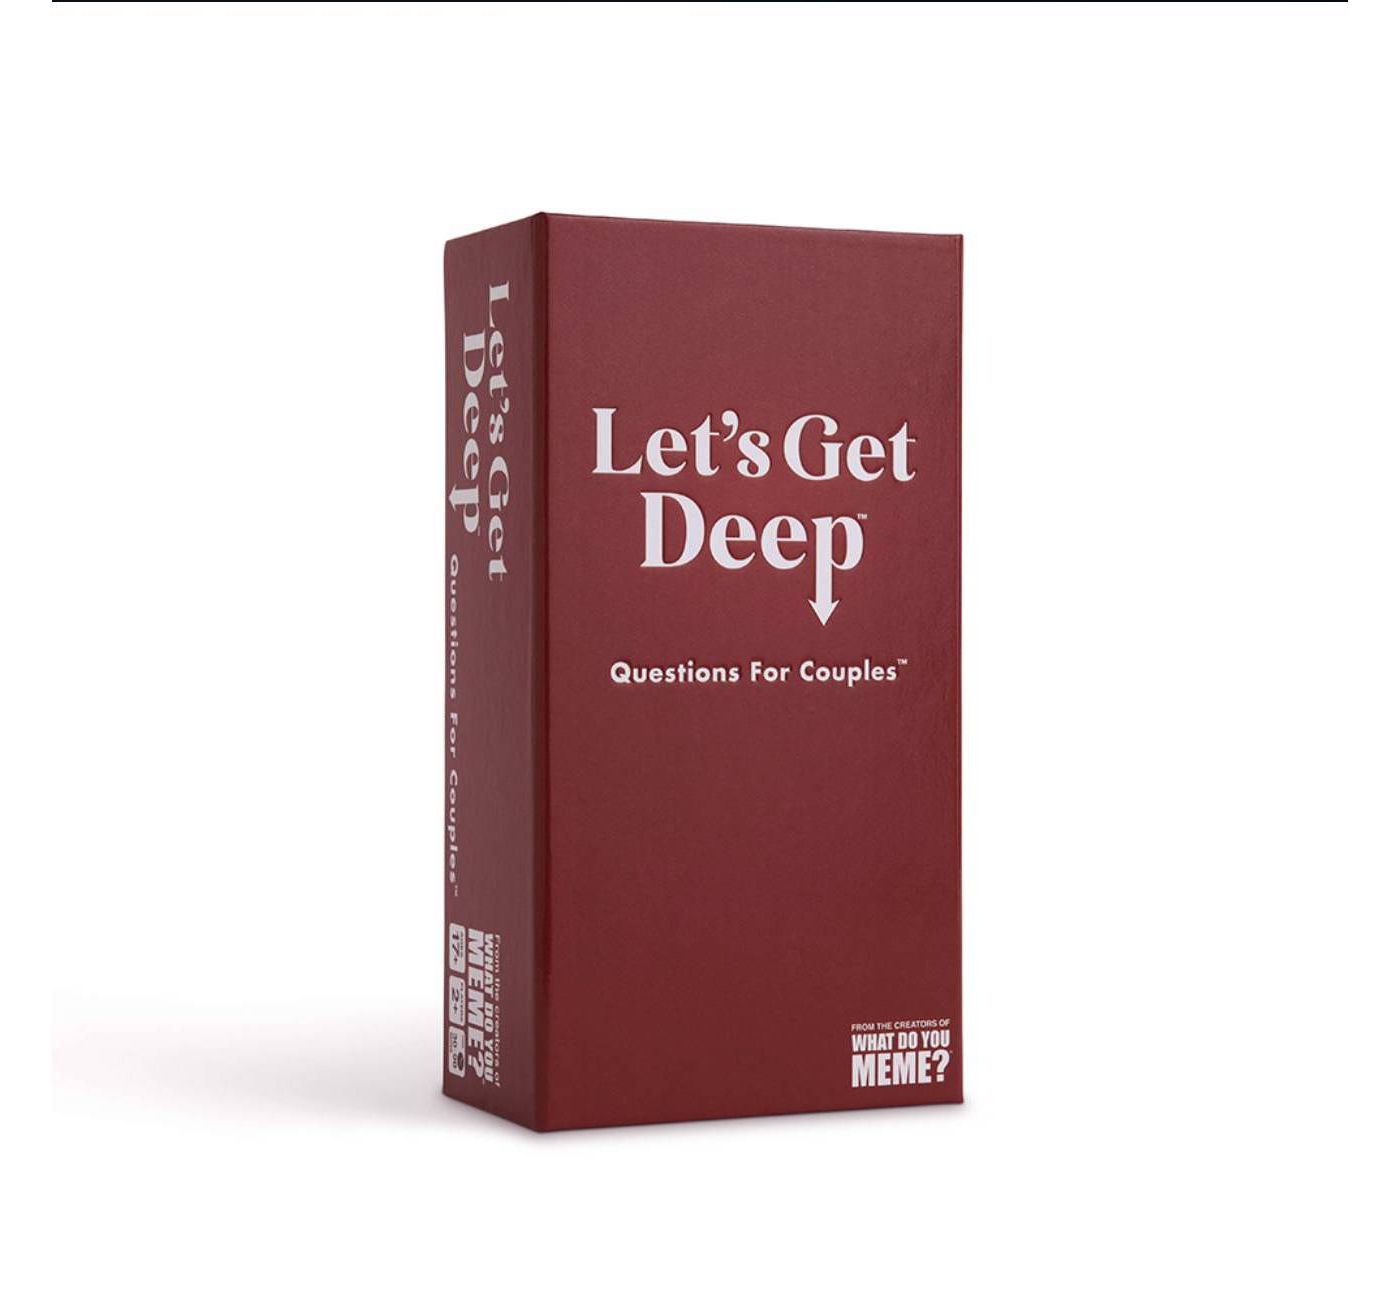 Let's Get Deep Adult Party Game by What Do You Meme? - image 1 of 10